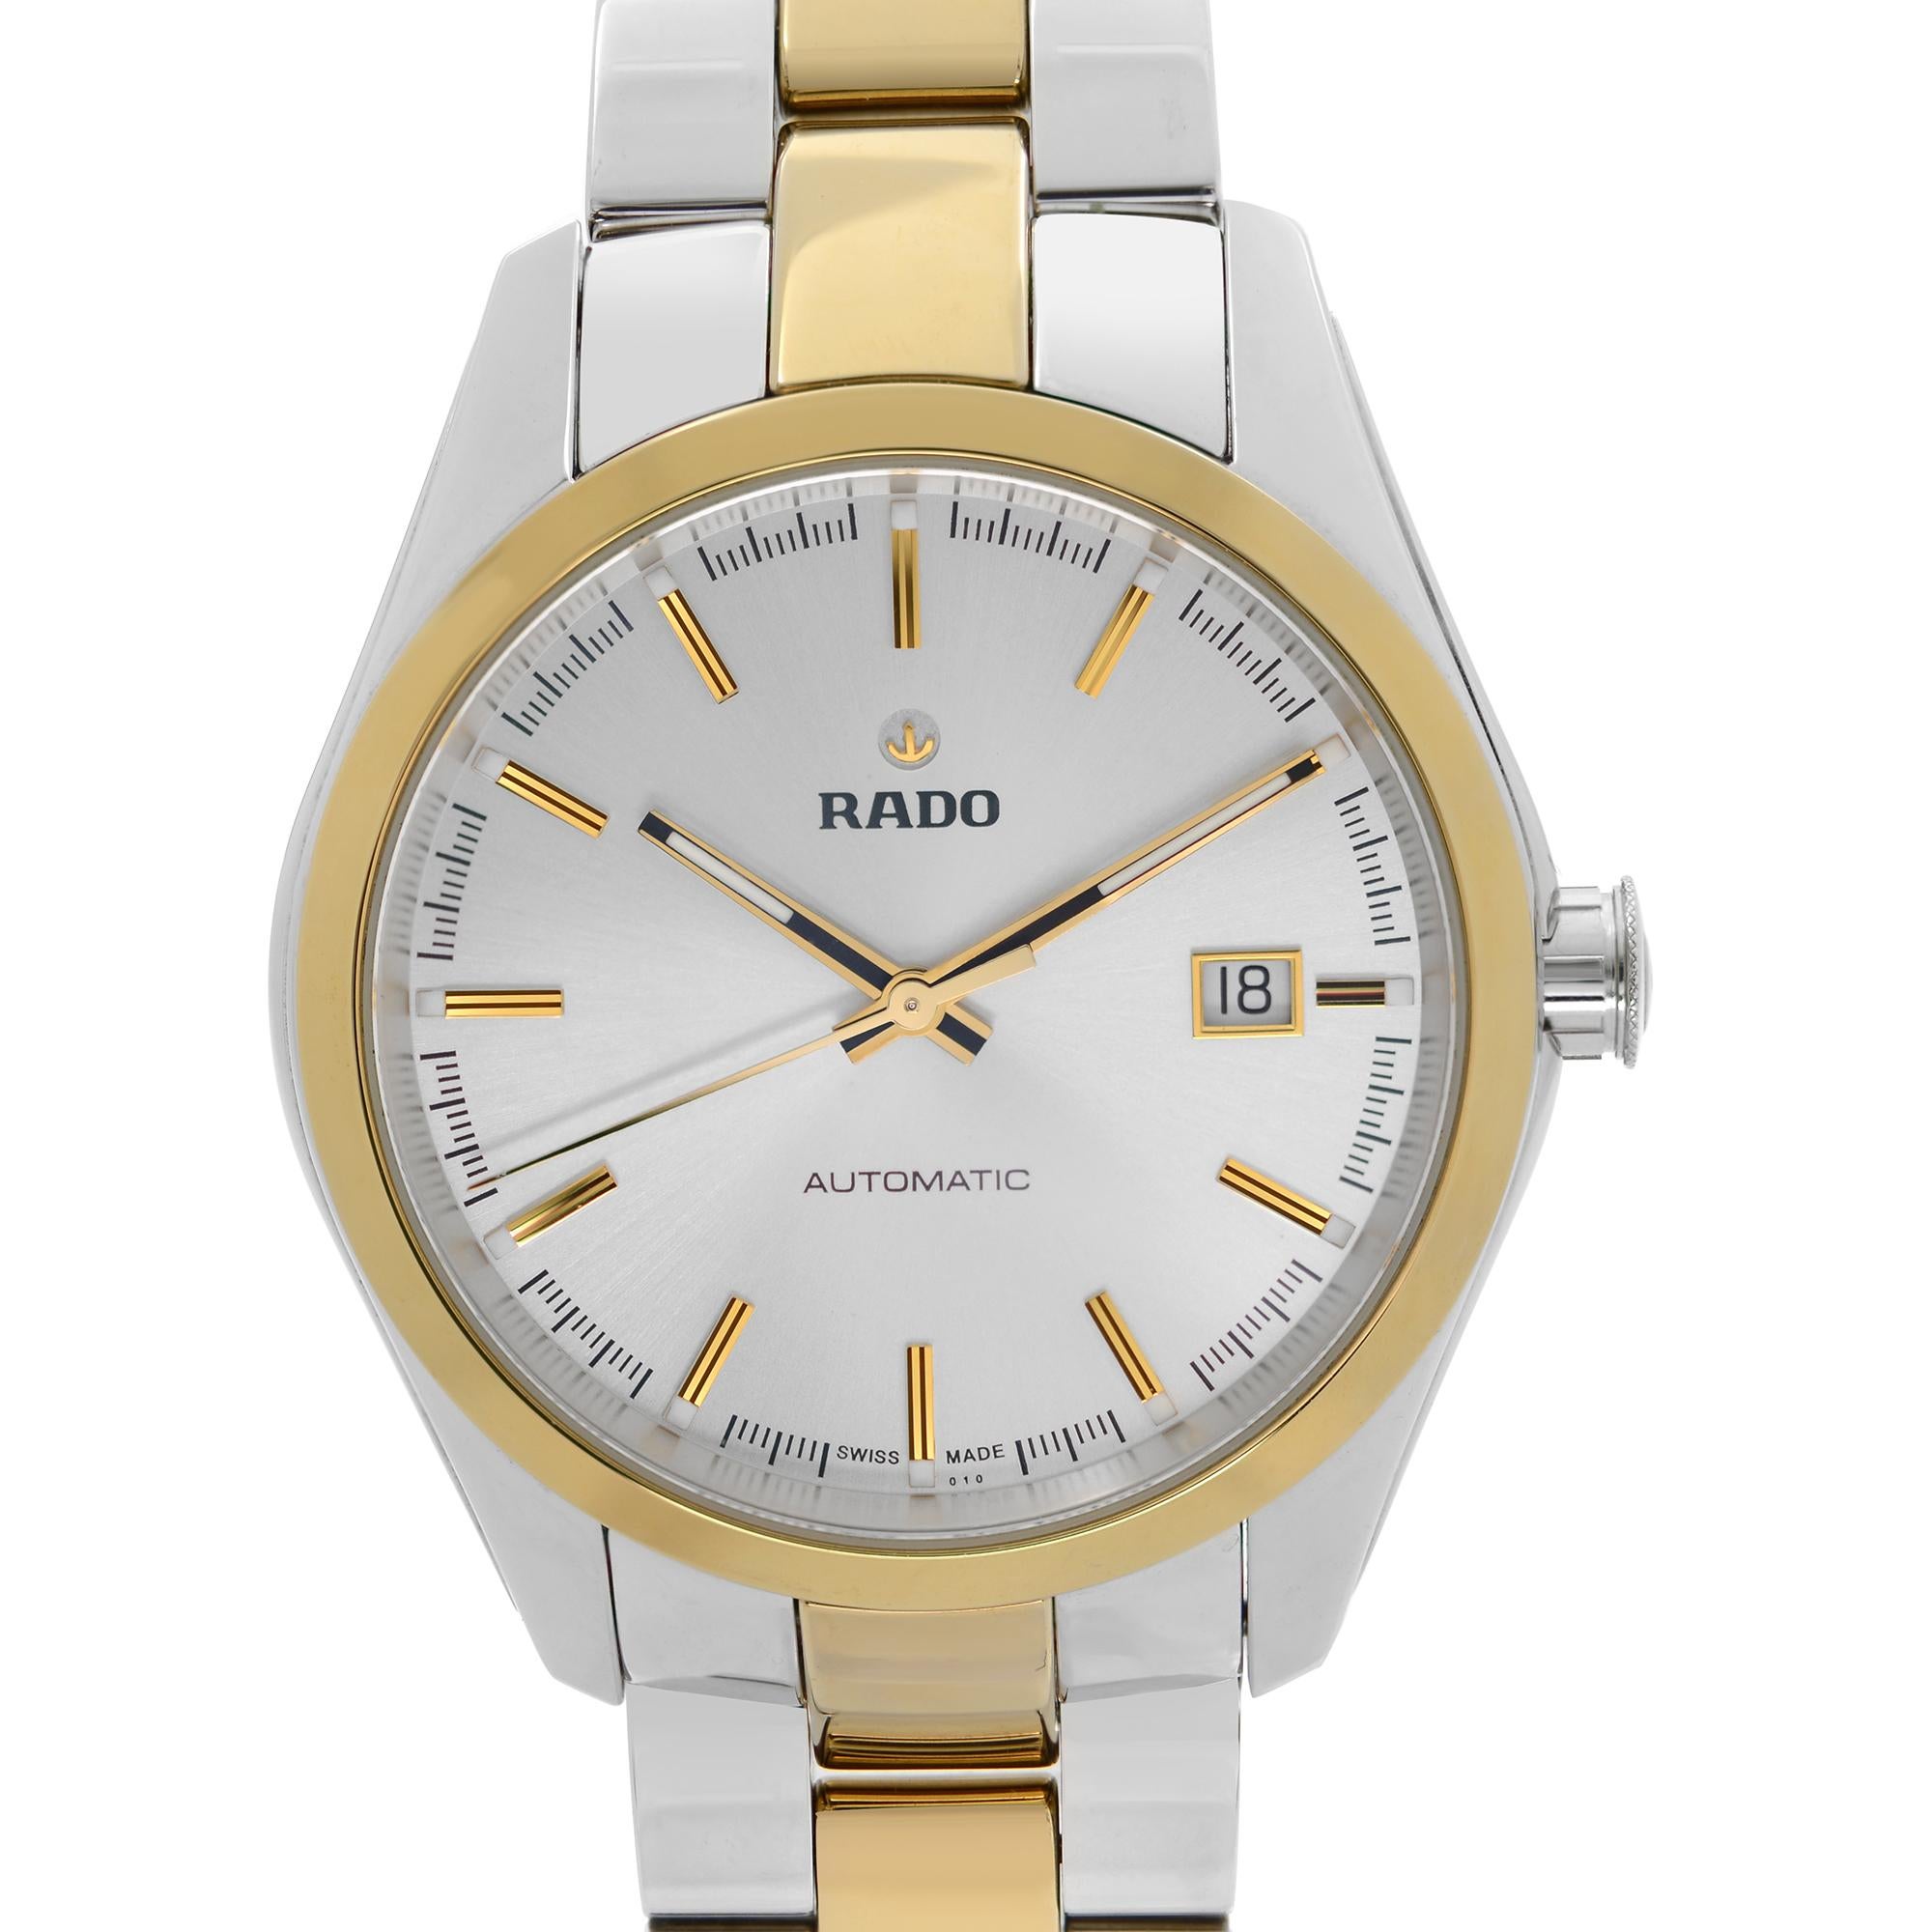 The watch has never been worn or used. It may have micro marks due to store handling. Comes with an original box and the seller's warranty card. 

Details:
MSRP 2400.00
Brand Rado
Department Men
Model Number R32979102
Country/Region of Manufacture